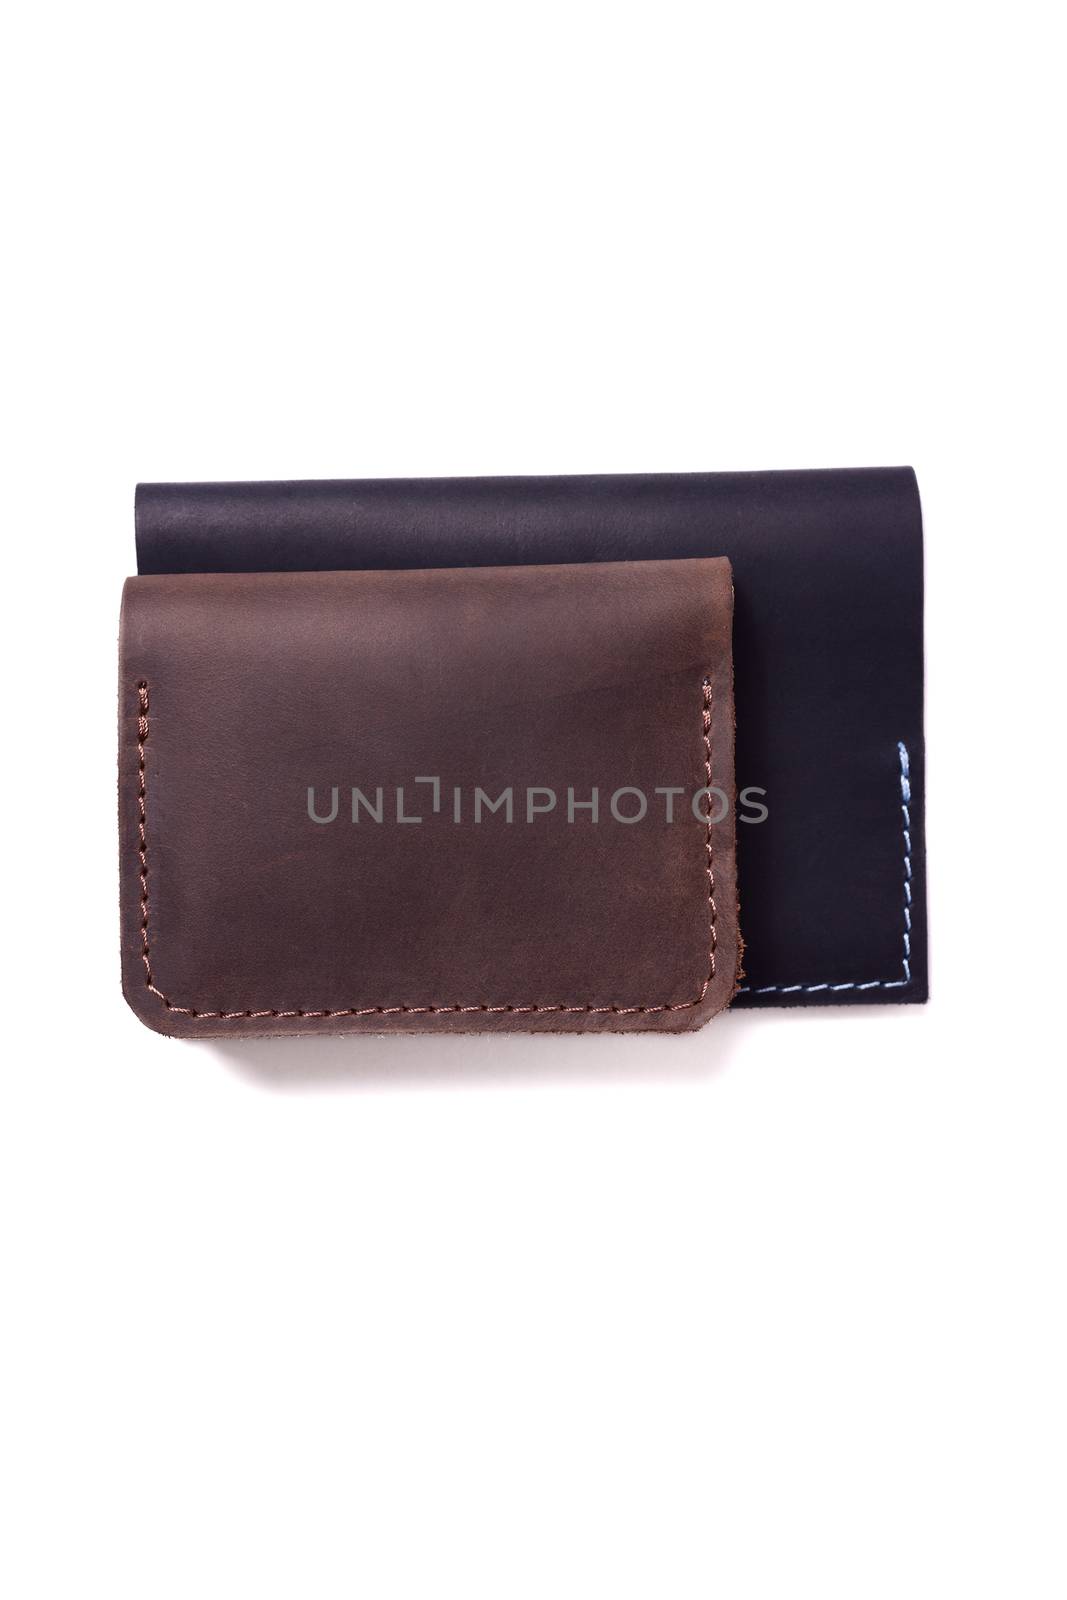 Handmade brown cardholder and black passport cover isolated on white background closeup. Stock photo of handmade luxury accessories. by alexsdriver